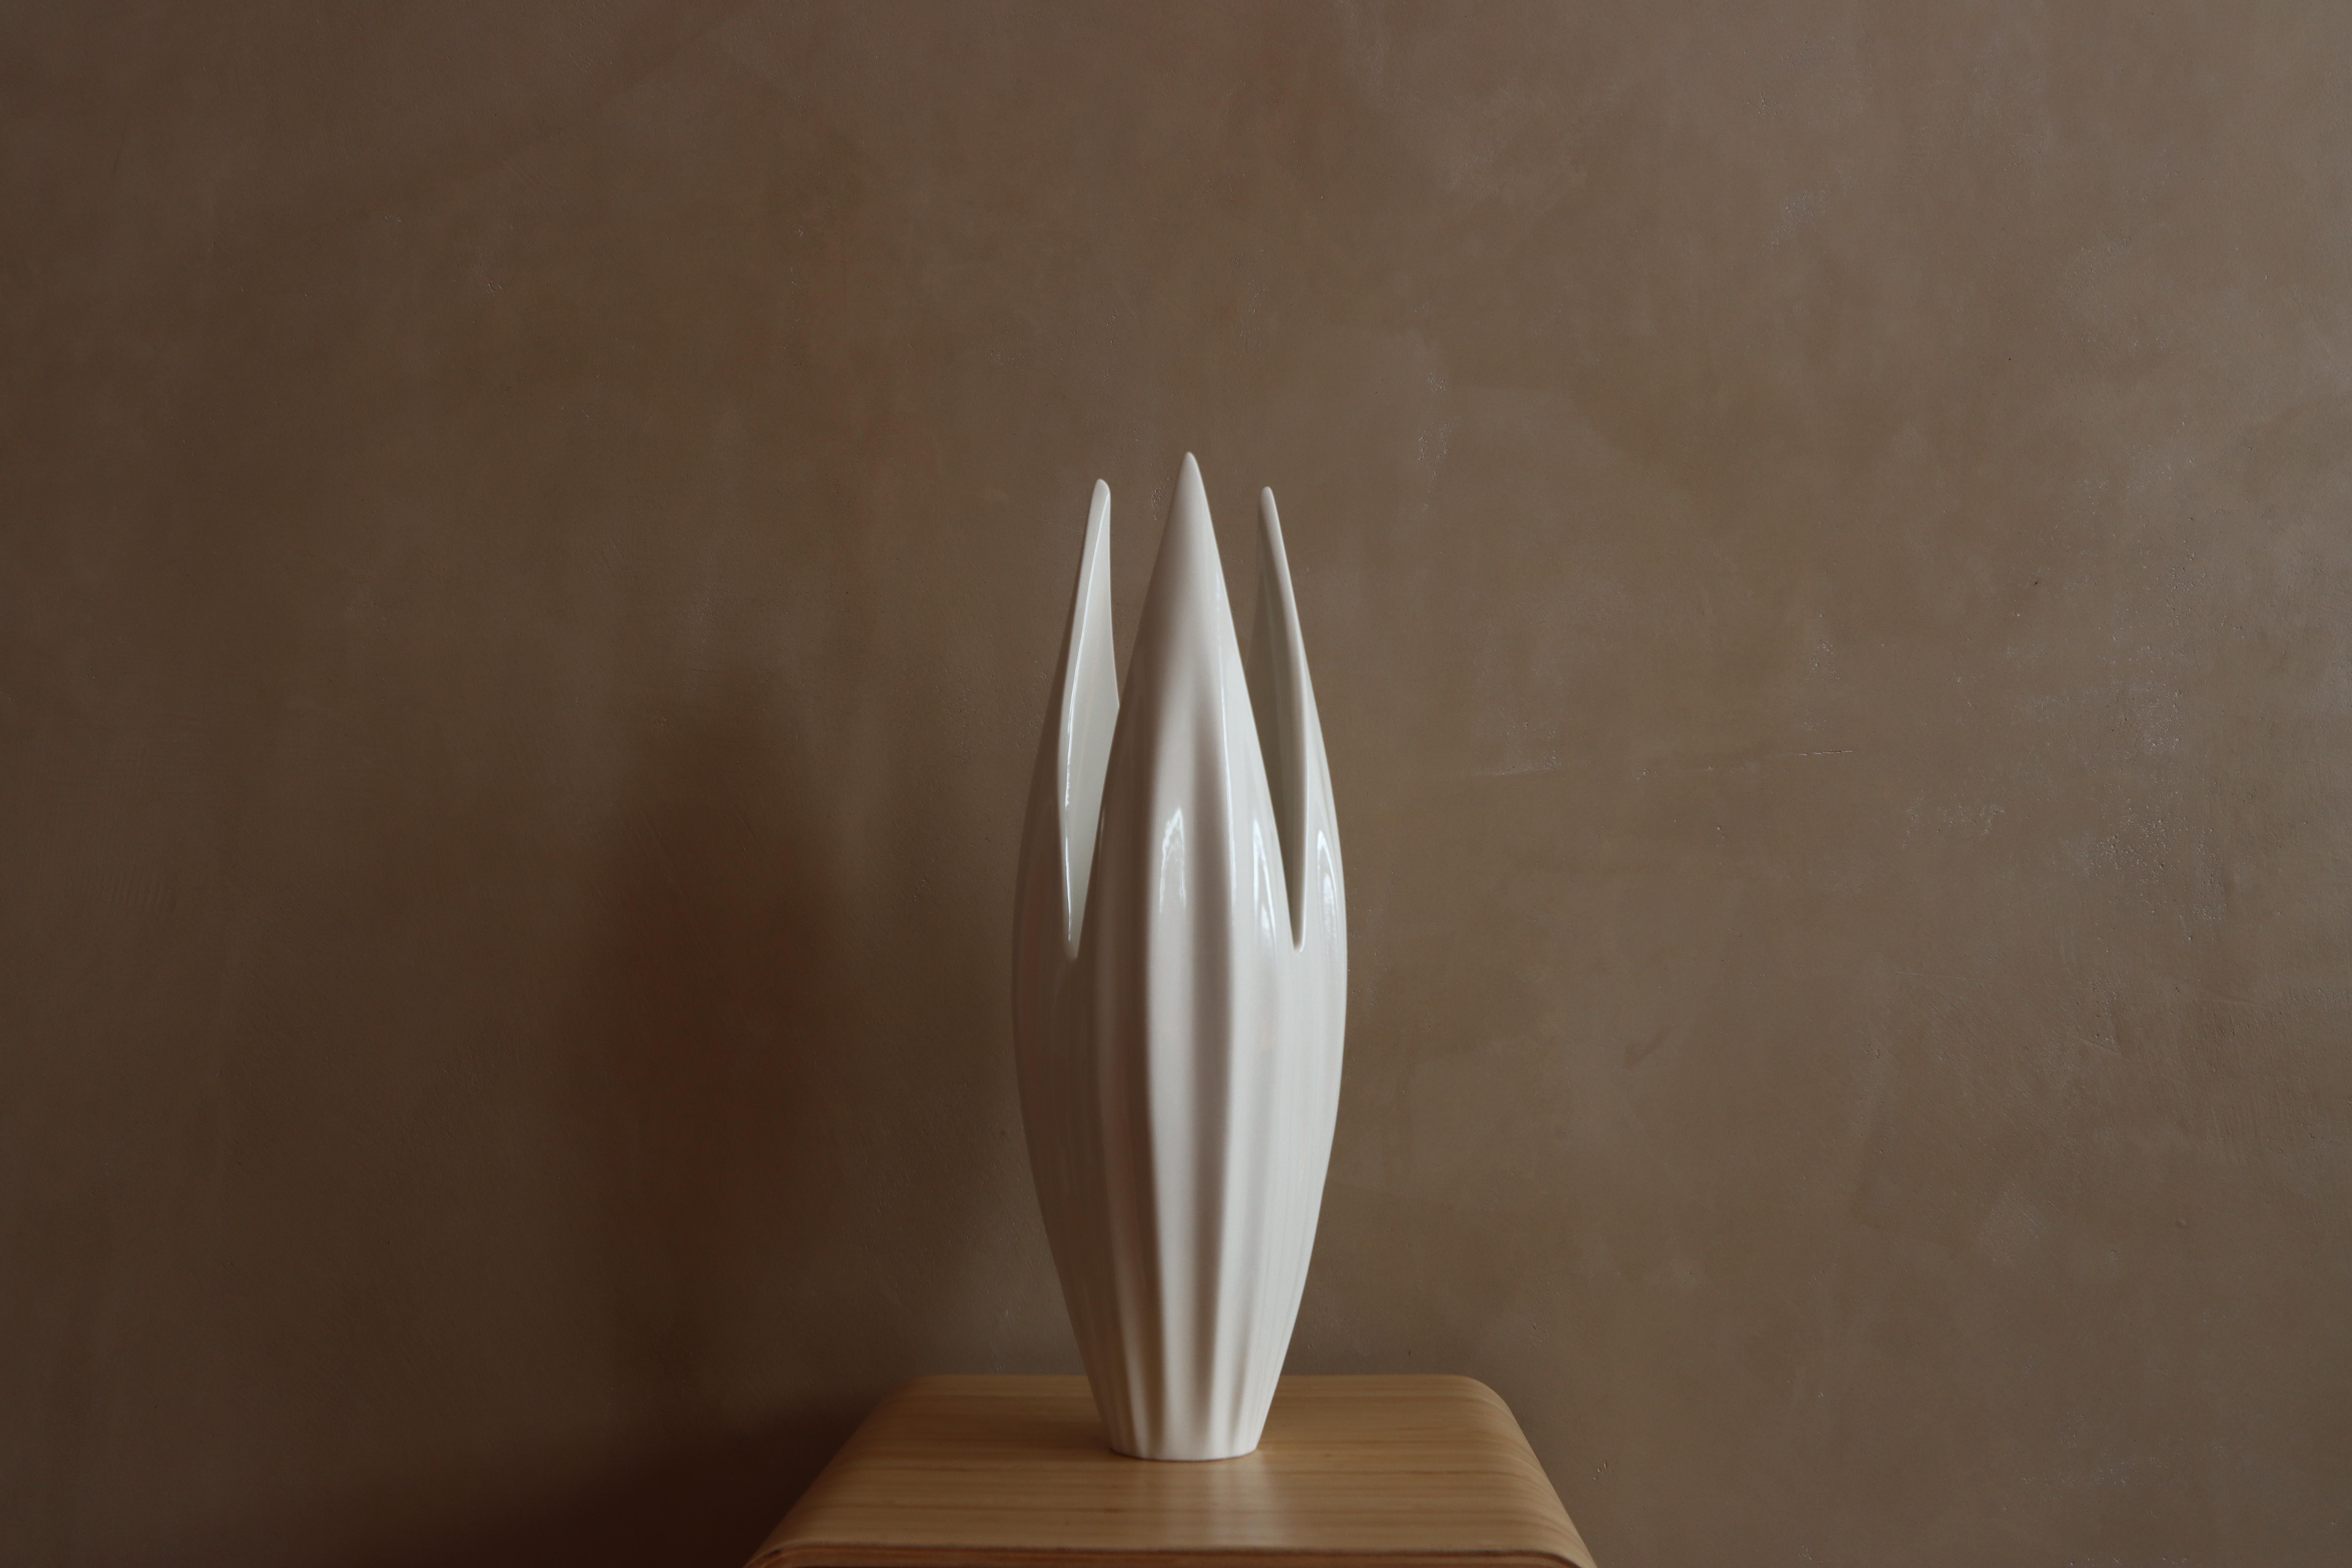 Introducing the Flax Vessel, a stunning, hand-crafted porcelain sculpture that adds a touch of elegance to any home or office space. This versatile piece can be used in a myriad of ways, whether to display your favourite flowers, hold a pillar